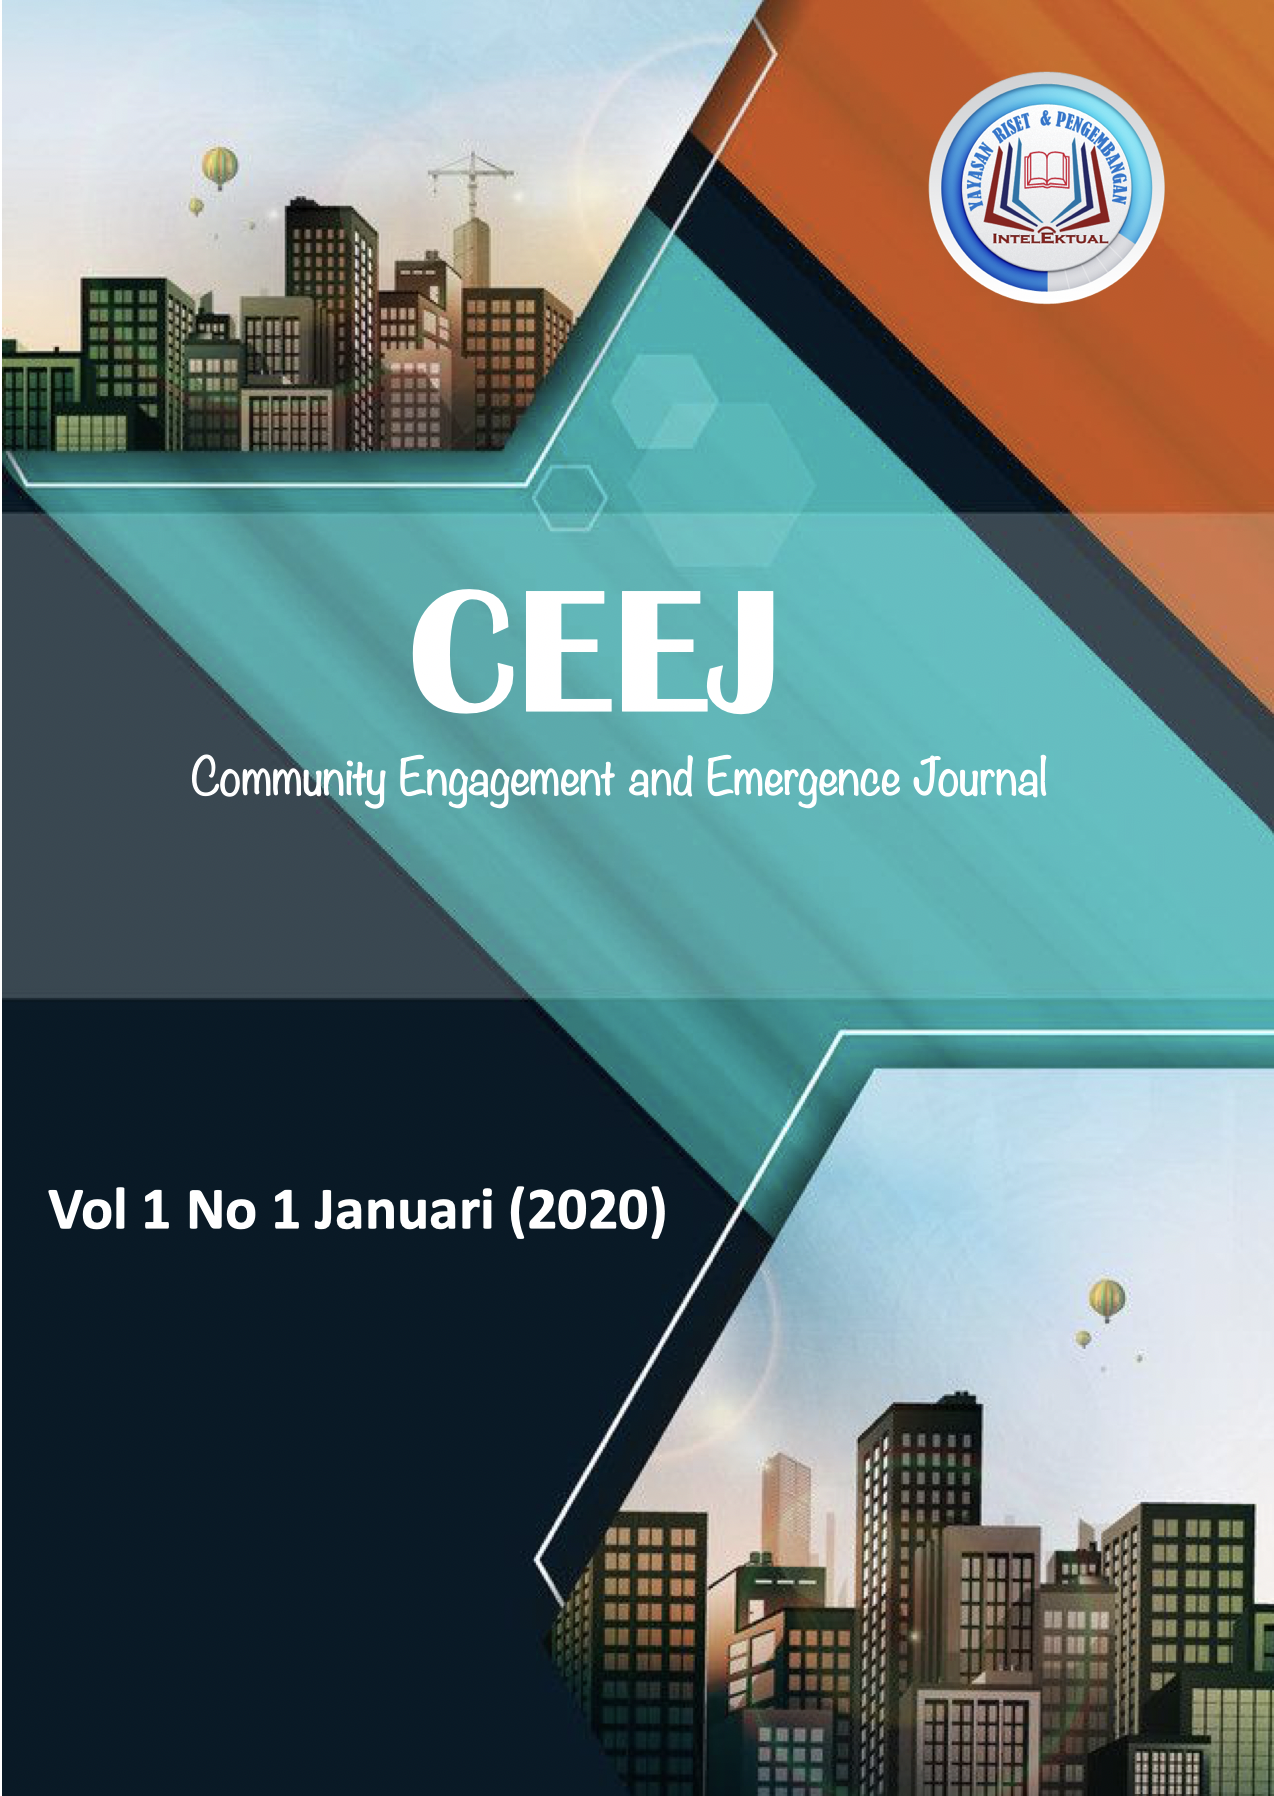 					View Vol. 1 No. 1 (2020): Community Engagement and Emergence Journal (CEEJ)
				